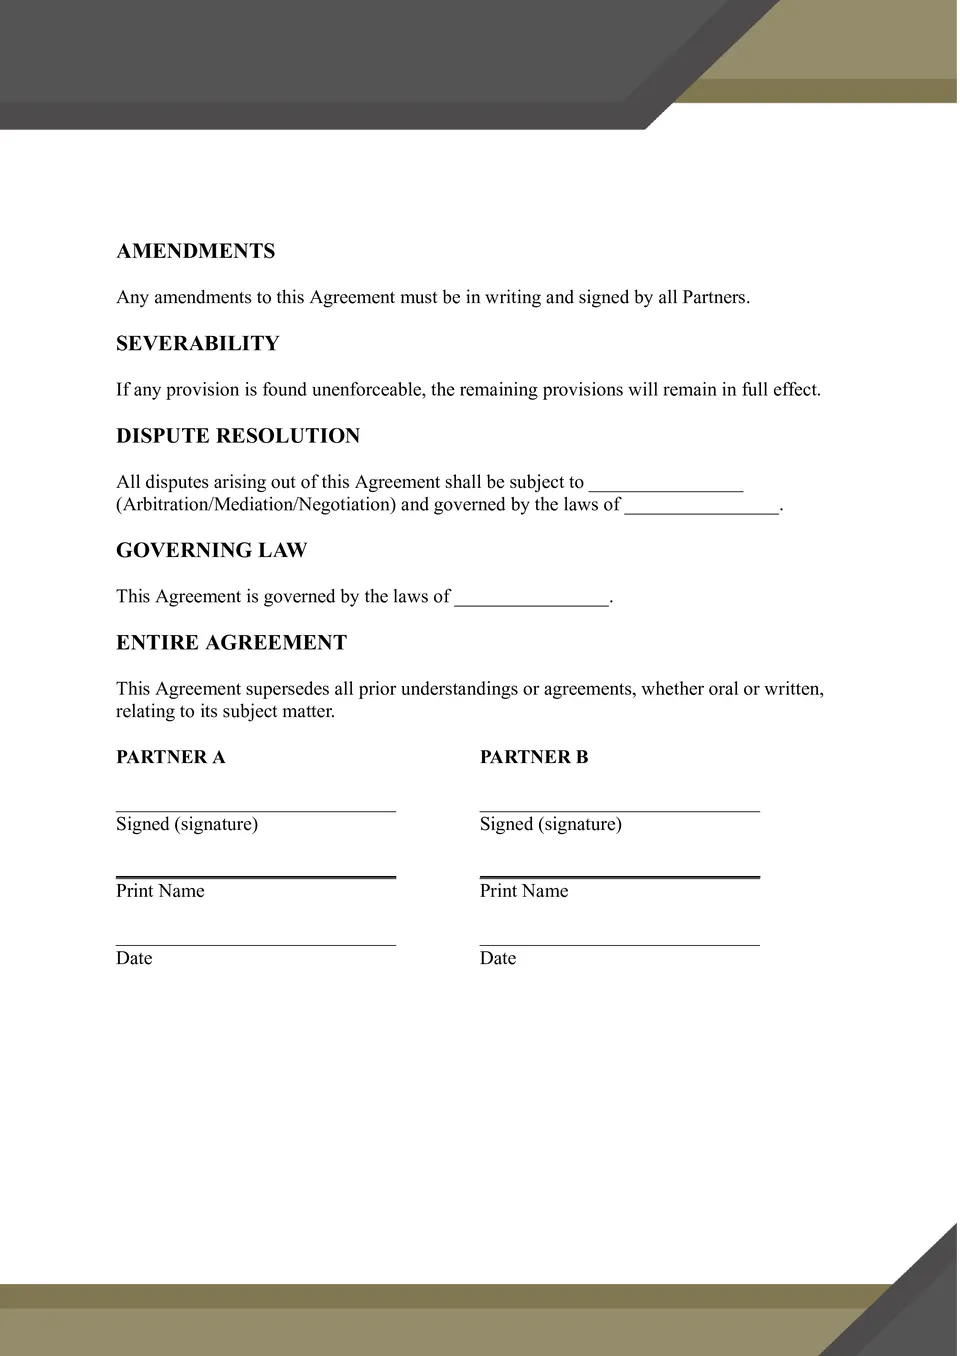 Partnership Agreement Template Page 3